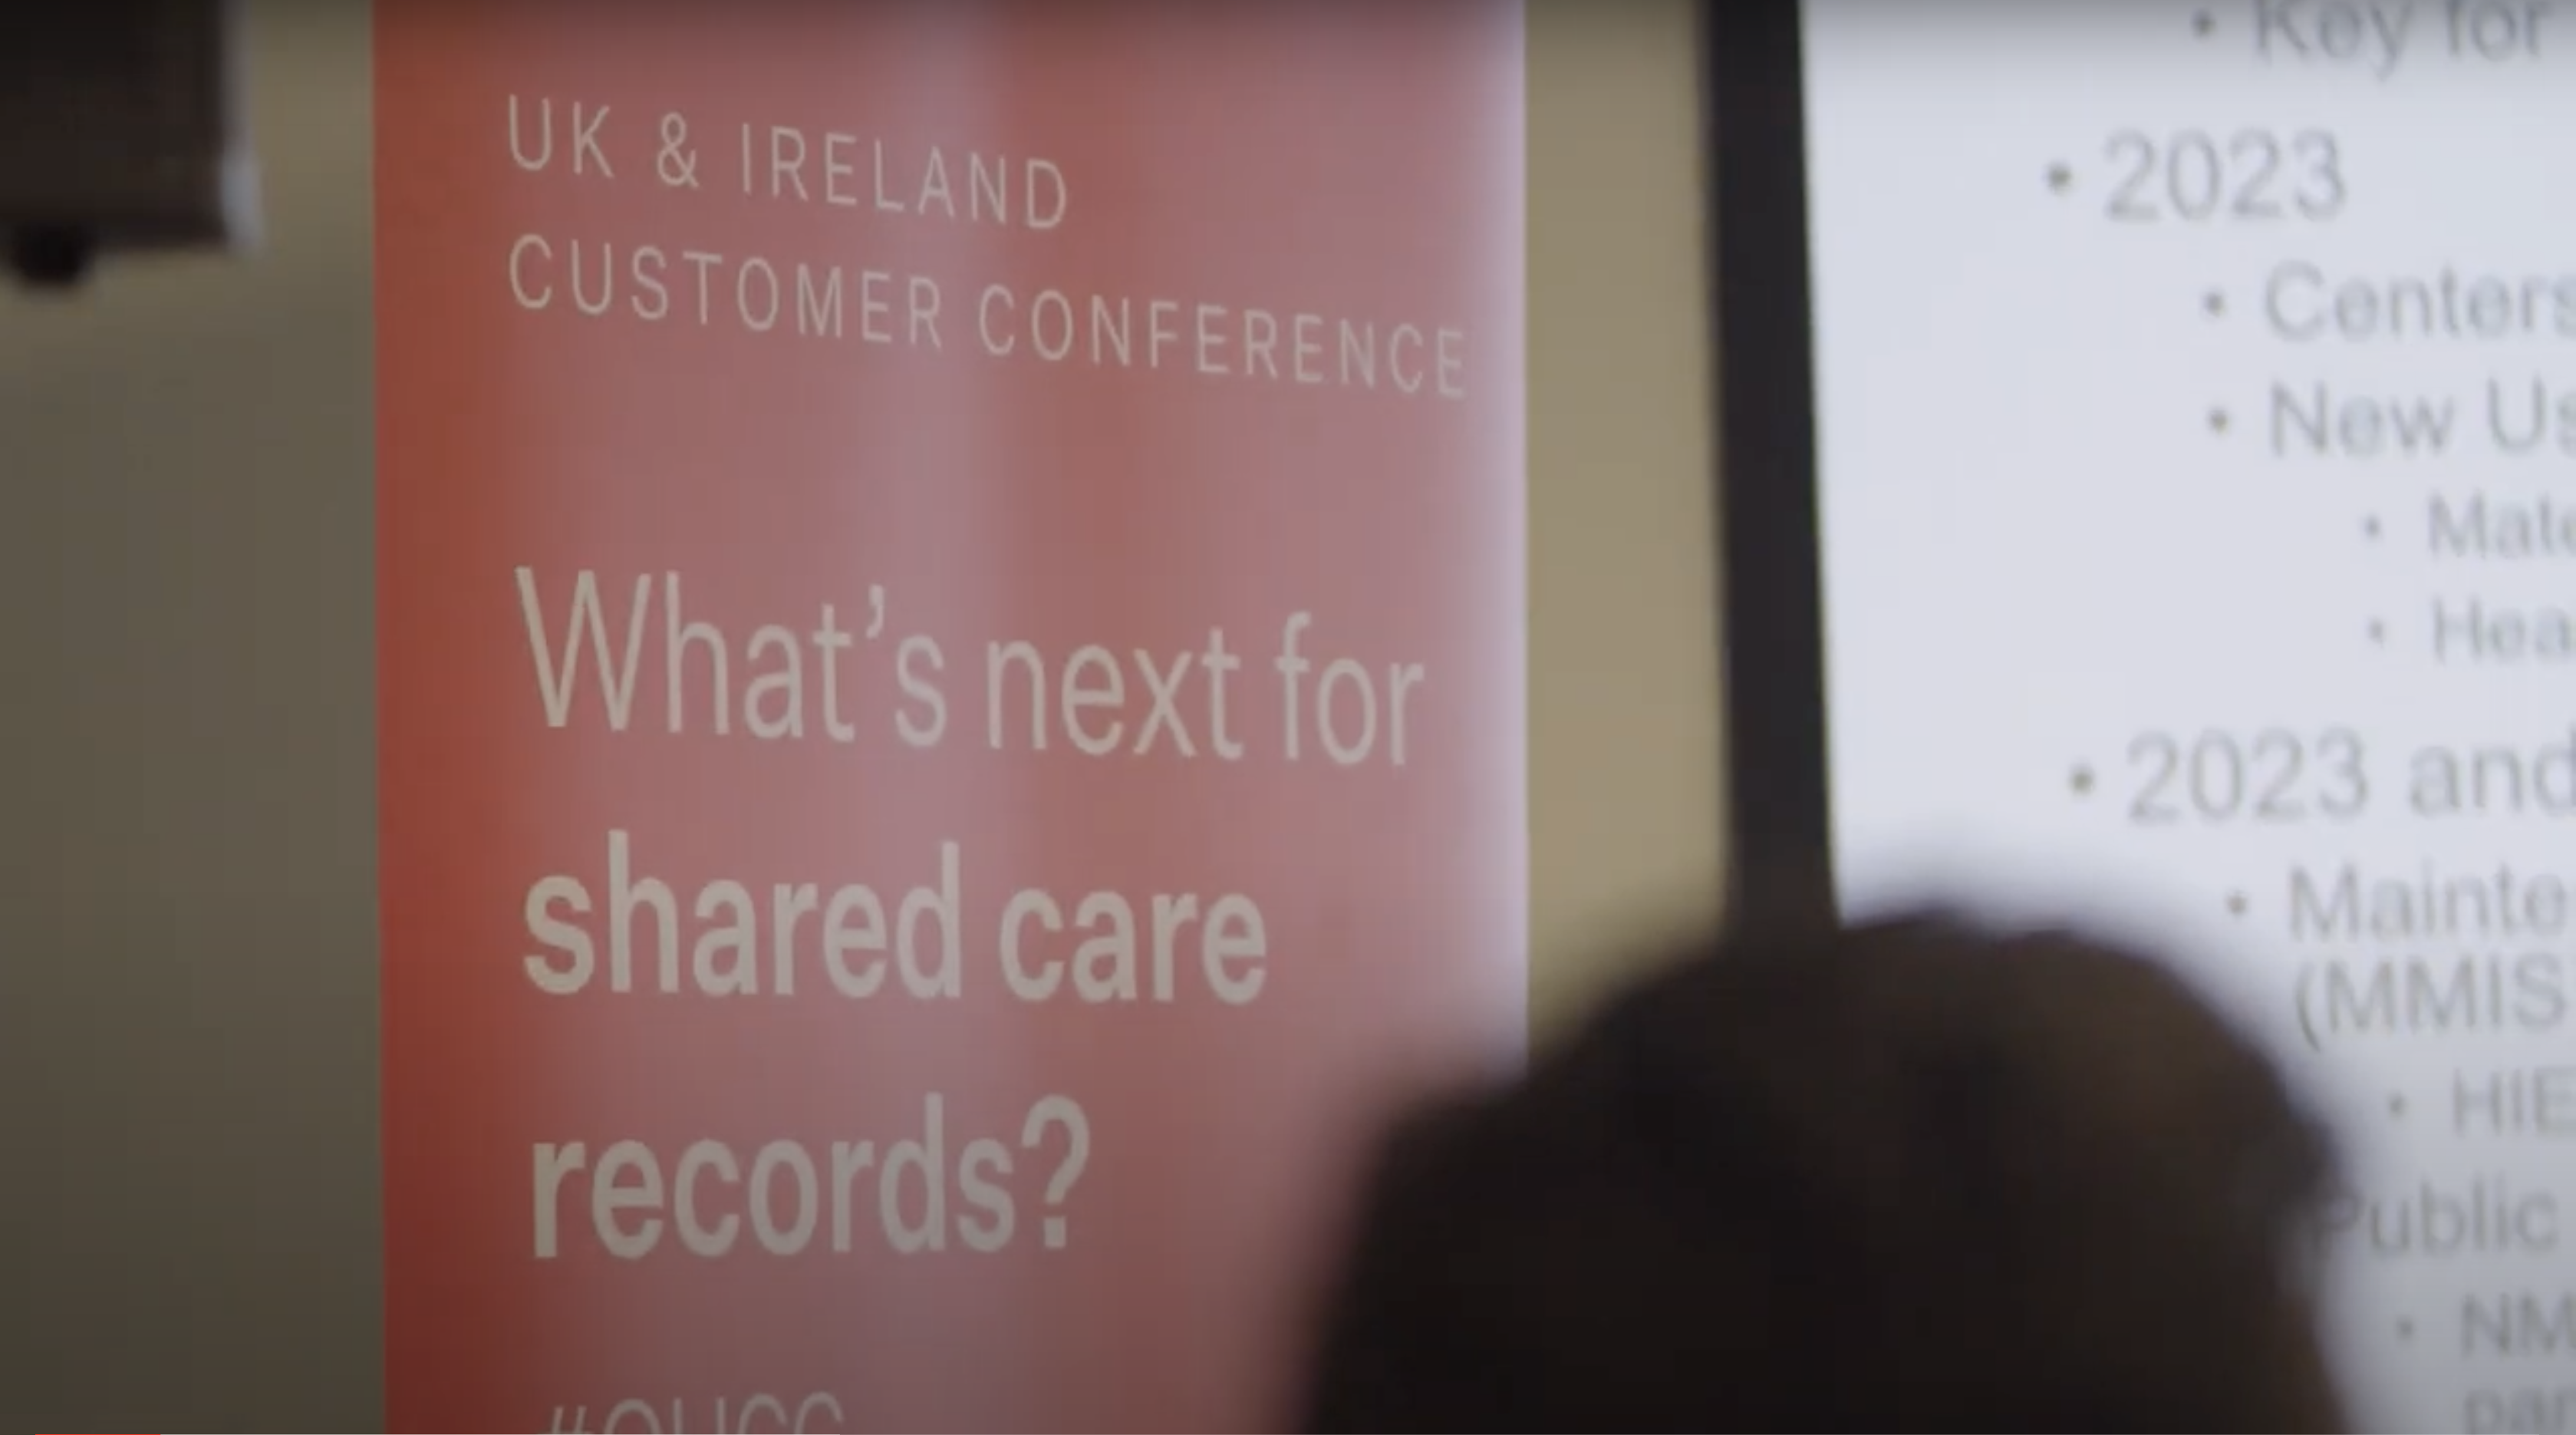 What’s next for shared care records?